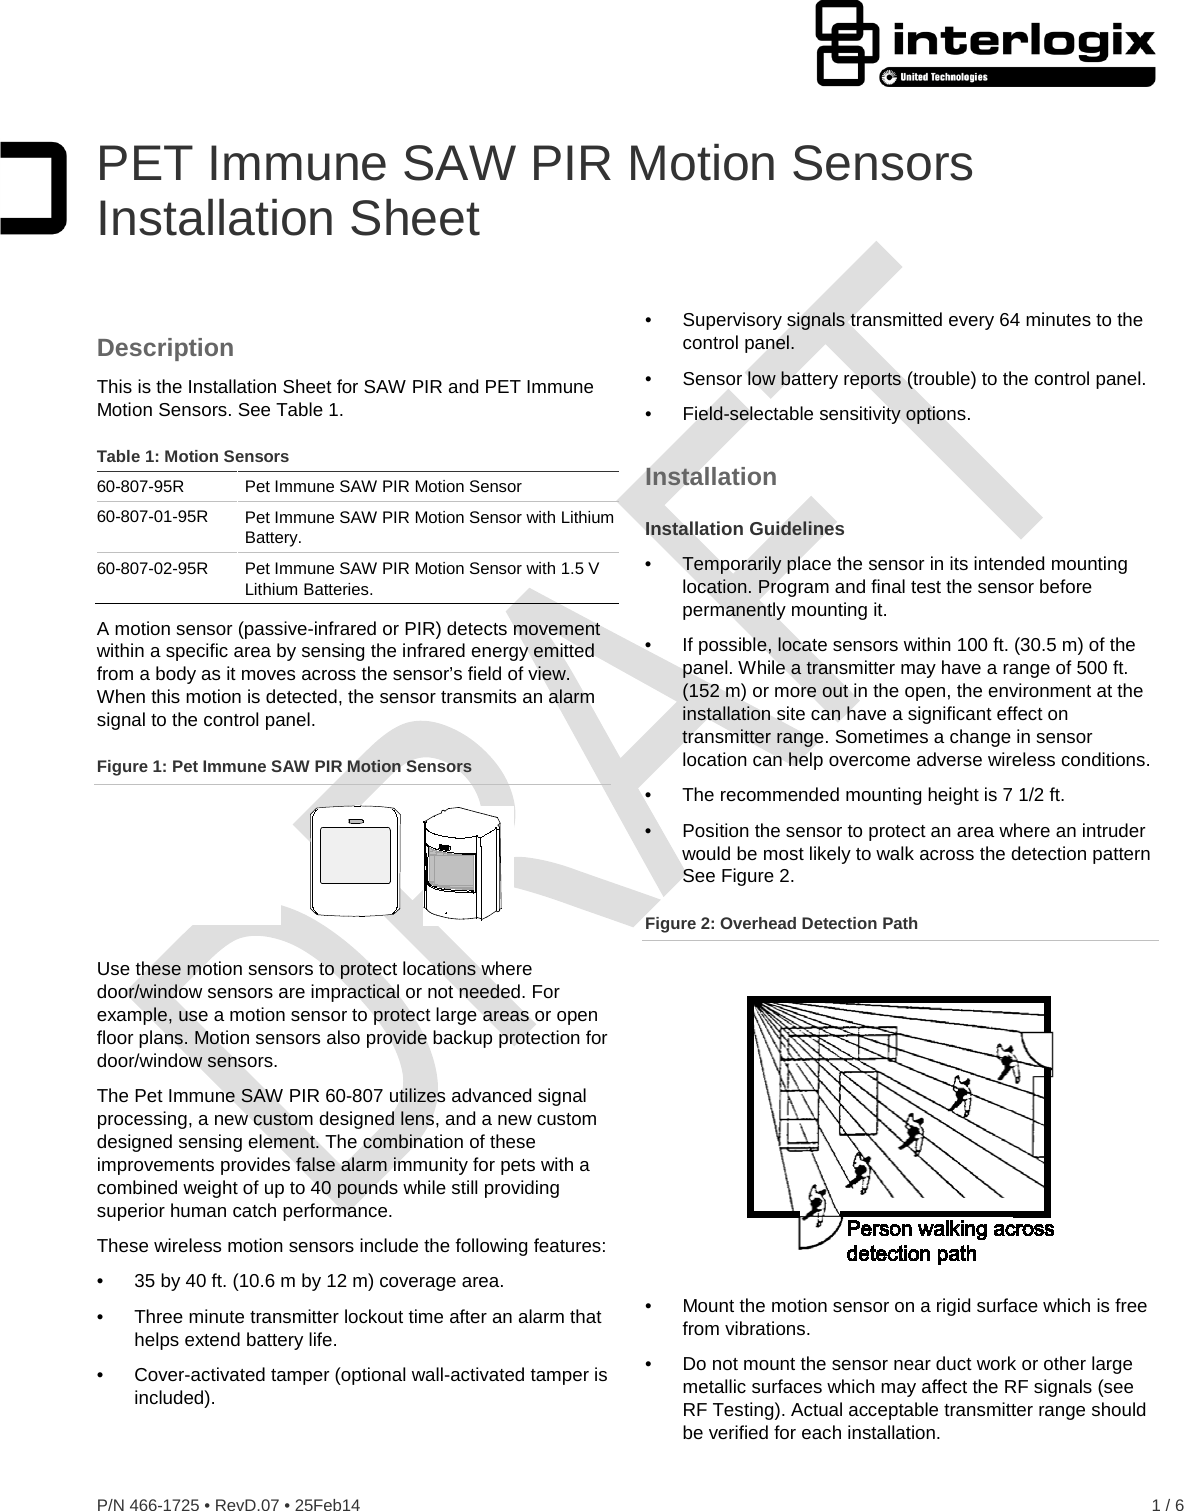  P/N 466-1725 • RevD.07 • 25Feb14    1 / 6  PET Immune SAW PIR Motion Sensors Installation Sheet Description This is the Installation Sheet for SAW PIR and PET Immune Motion Sensors. See Table 1.   Table 1: Motion Sensors 60-807-95R Pet Immune SAW PIR Motion Sensor 60-807-01-95R Pet Immune SAW PIR Motion Sensor with Lithium Battery. 60-807-02-95R Pet Immune SAW PIR Motion Sensor with 1.5 V Lithium Batteries. A motion sensor (passive-infrared or PIR) detects movement within a specific area by sensing the infrared energy emitted from a body as it moves across the sensor’s field of view. When this motion is detected, the sensor transmits an alarm signal to the control panel. Figure 1: Pet Immune SAW PIR Motion Sensors  Use these motion sensors to protect locations where door/window sensors are impractical or not needed. For example, use a motion sensor to protect large areas or open floor plans. Motion sensors also provide backup protection for door/window sensors. The Pet Immune SAW PIR 60-807 utilizes advanced signal processing, a new custom designed lens, and a new custom designed sensing element. The combination of these improvements provides false alarm immunity for pets with a combined weight of up to 40 pounds while still providing superior human catch performance. These wireless motion sensors include the following features: •  35 by 40 ft. (10.6 m by 12 m) coverage area. •  Three minute transmitter lockout time after an alarm that helps extend battery life. •  Cover-activated tamper (optional wall-activated tamper is included). •  Supervisory signals transmitted every 64 minutes to the control panel. •  Sensor low battery reports (trouble) to the control panel. •  Field-selectable sensitivity options. Installation Installation Guidelines •  Temporarily place the sensor in its intended mounting location. Program and final test the sensor before permanently mounting it. •  If possible, locate sensors within 100 ft. (30.5 m) of the panel. While a transmitter may have a range of 500 ft. (152 m) or more out in the open, the environment at the installation site can have a significant effect on transmitter range. Sometimes a change in sensor location can help overcome adverse wireless conditions. •  The recommended mounting height is 7 1/2 ft.  •  Position the sensor to protect an area where an intruder would be most likely to walk across the detection pattern See Figure 2. Figure 2: Overhead Detection Path  •  Mount the motion sensor on a rigid surface which is free from vibrations. •  Do not mount the sensor near duct work or other large metallic surfaces which may affect the RF signals (see RF Testing). Actual acceptable transmitter range should be verified for each installation.  